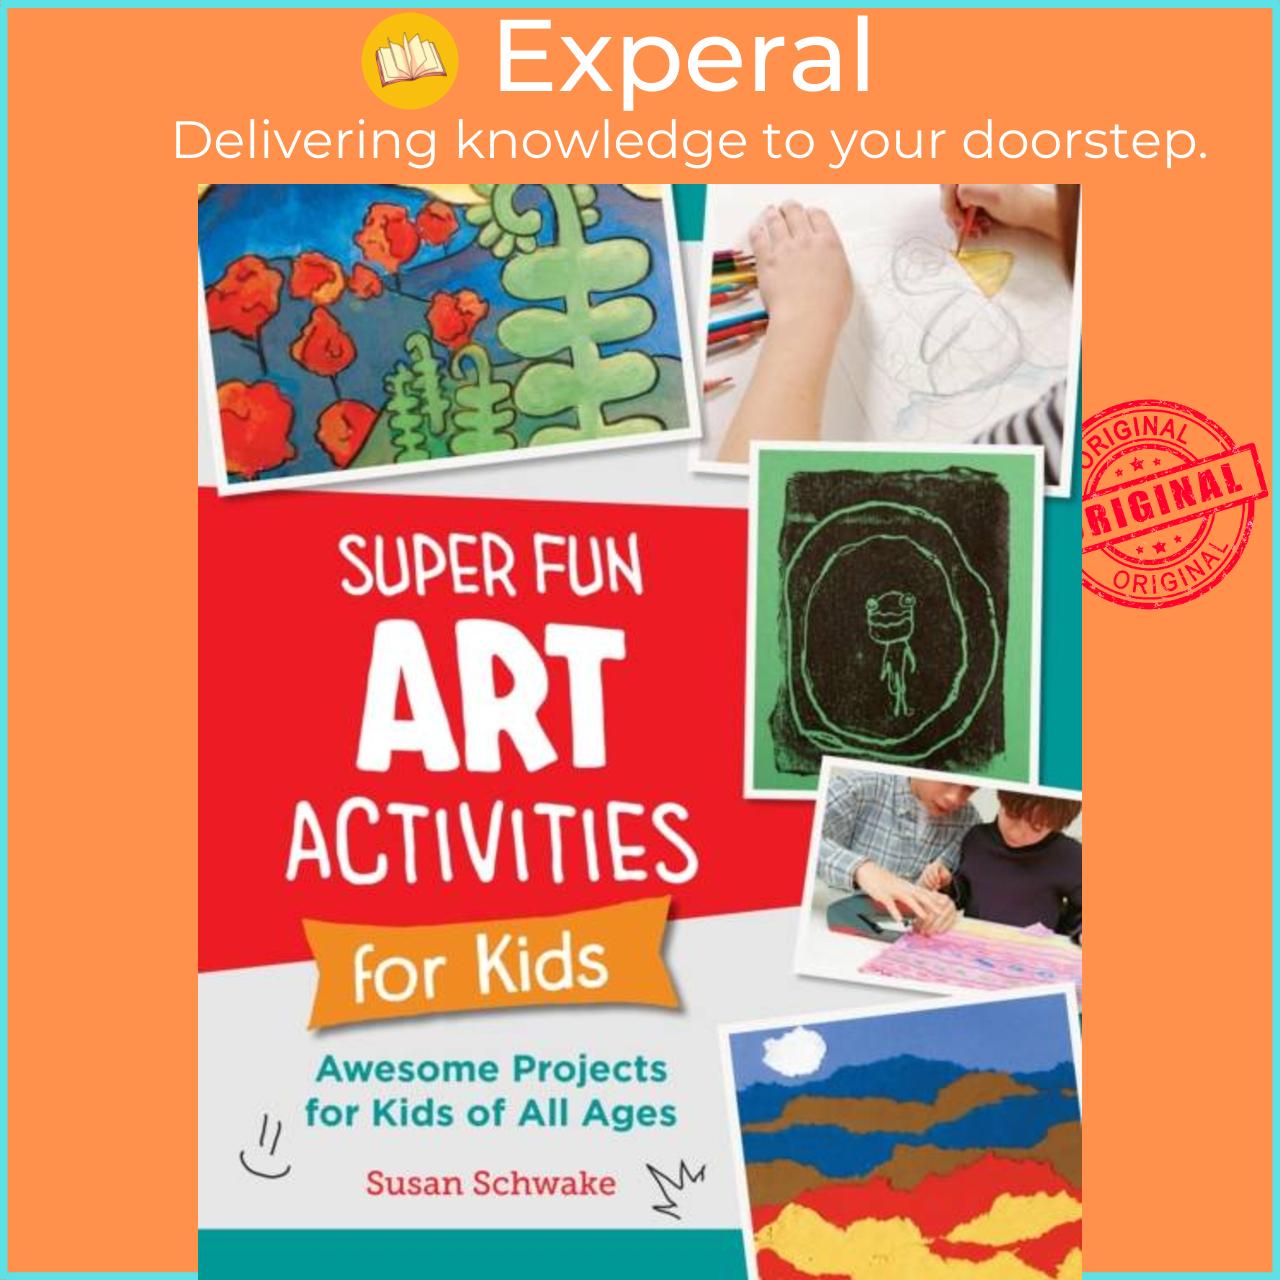 Sách - Super Fun Art Activities for Kids - Awesome Projects for Kids of All Age by Susan Schwake (UK edition, paperback)